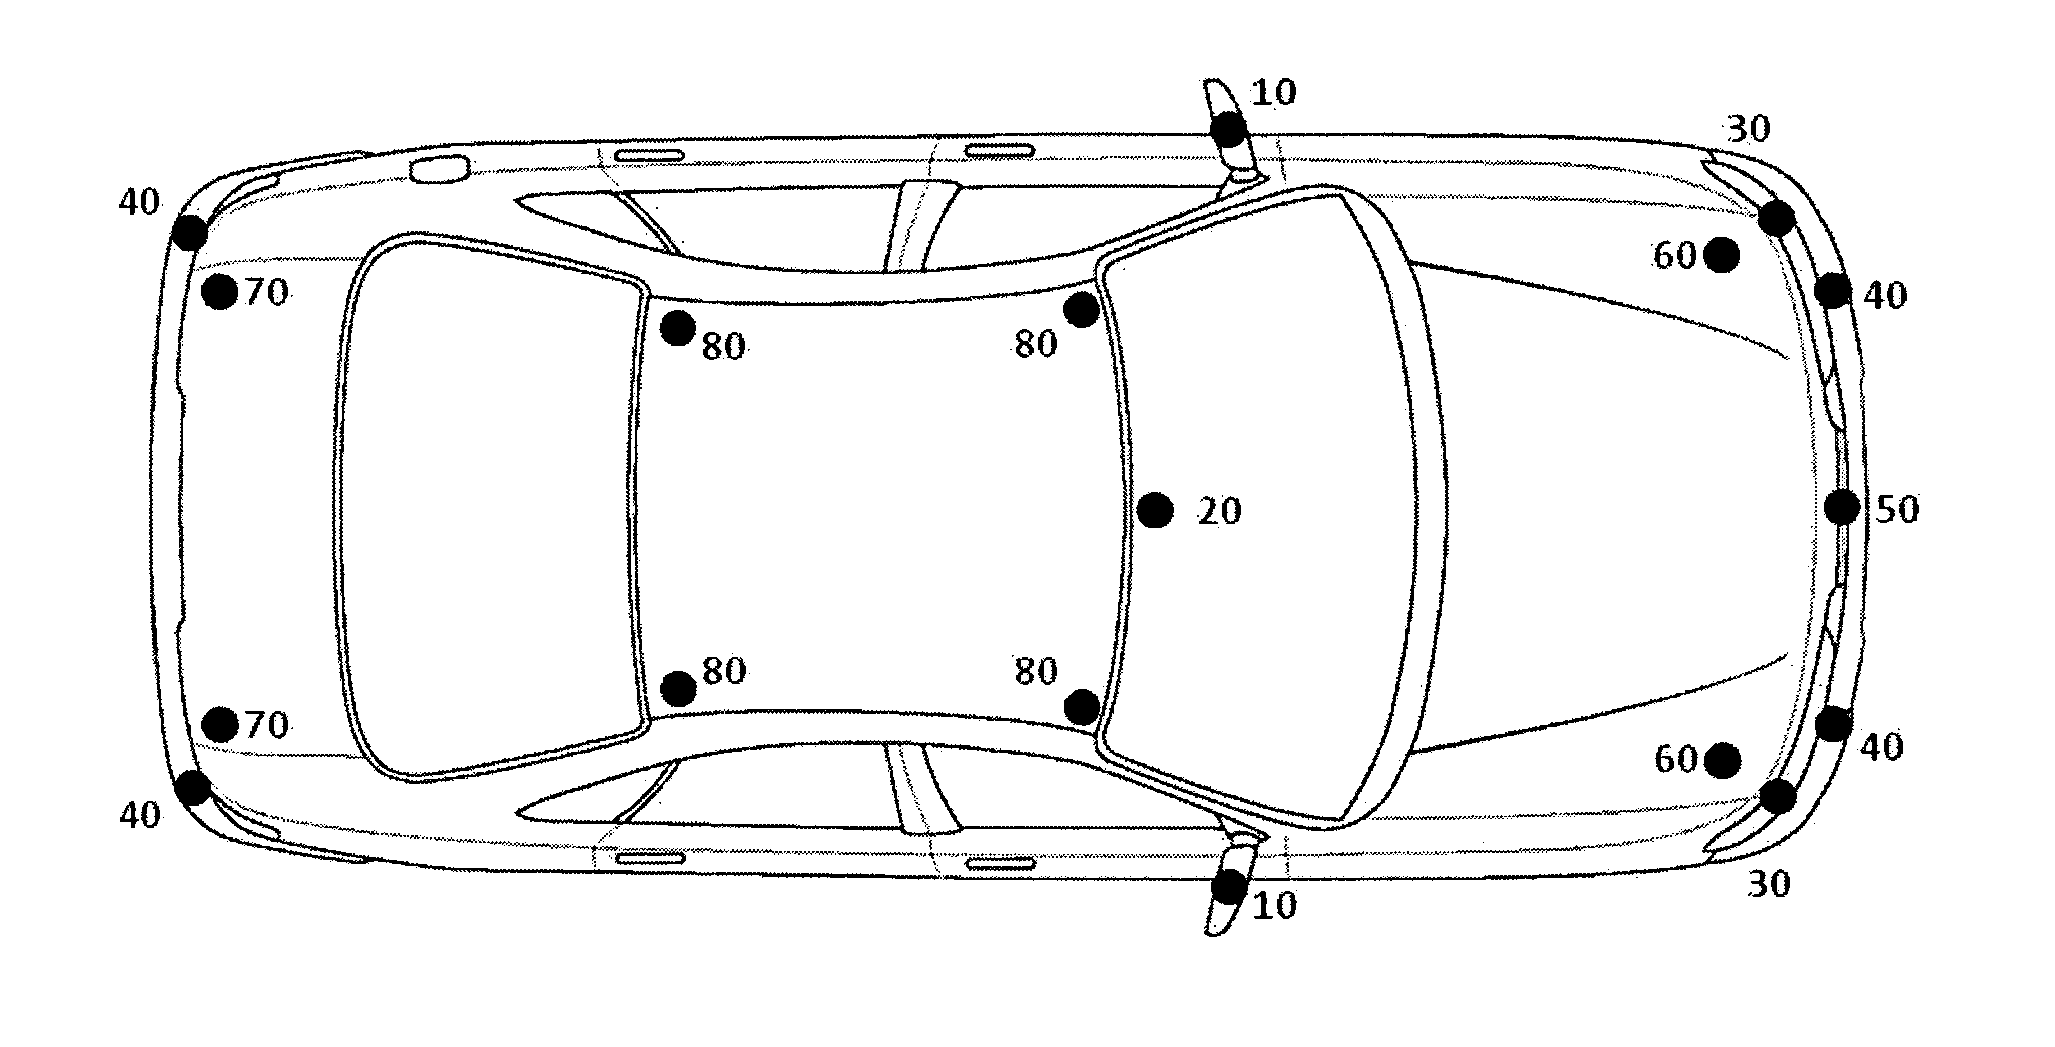 Distributed lidar sensing system for wide field of view three dimensional mapping and method of using same